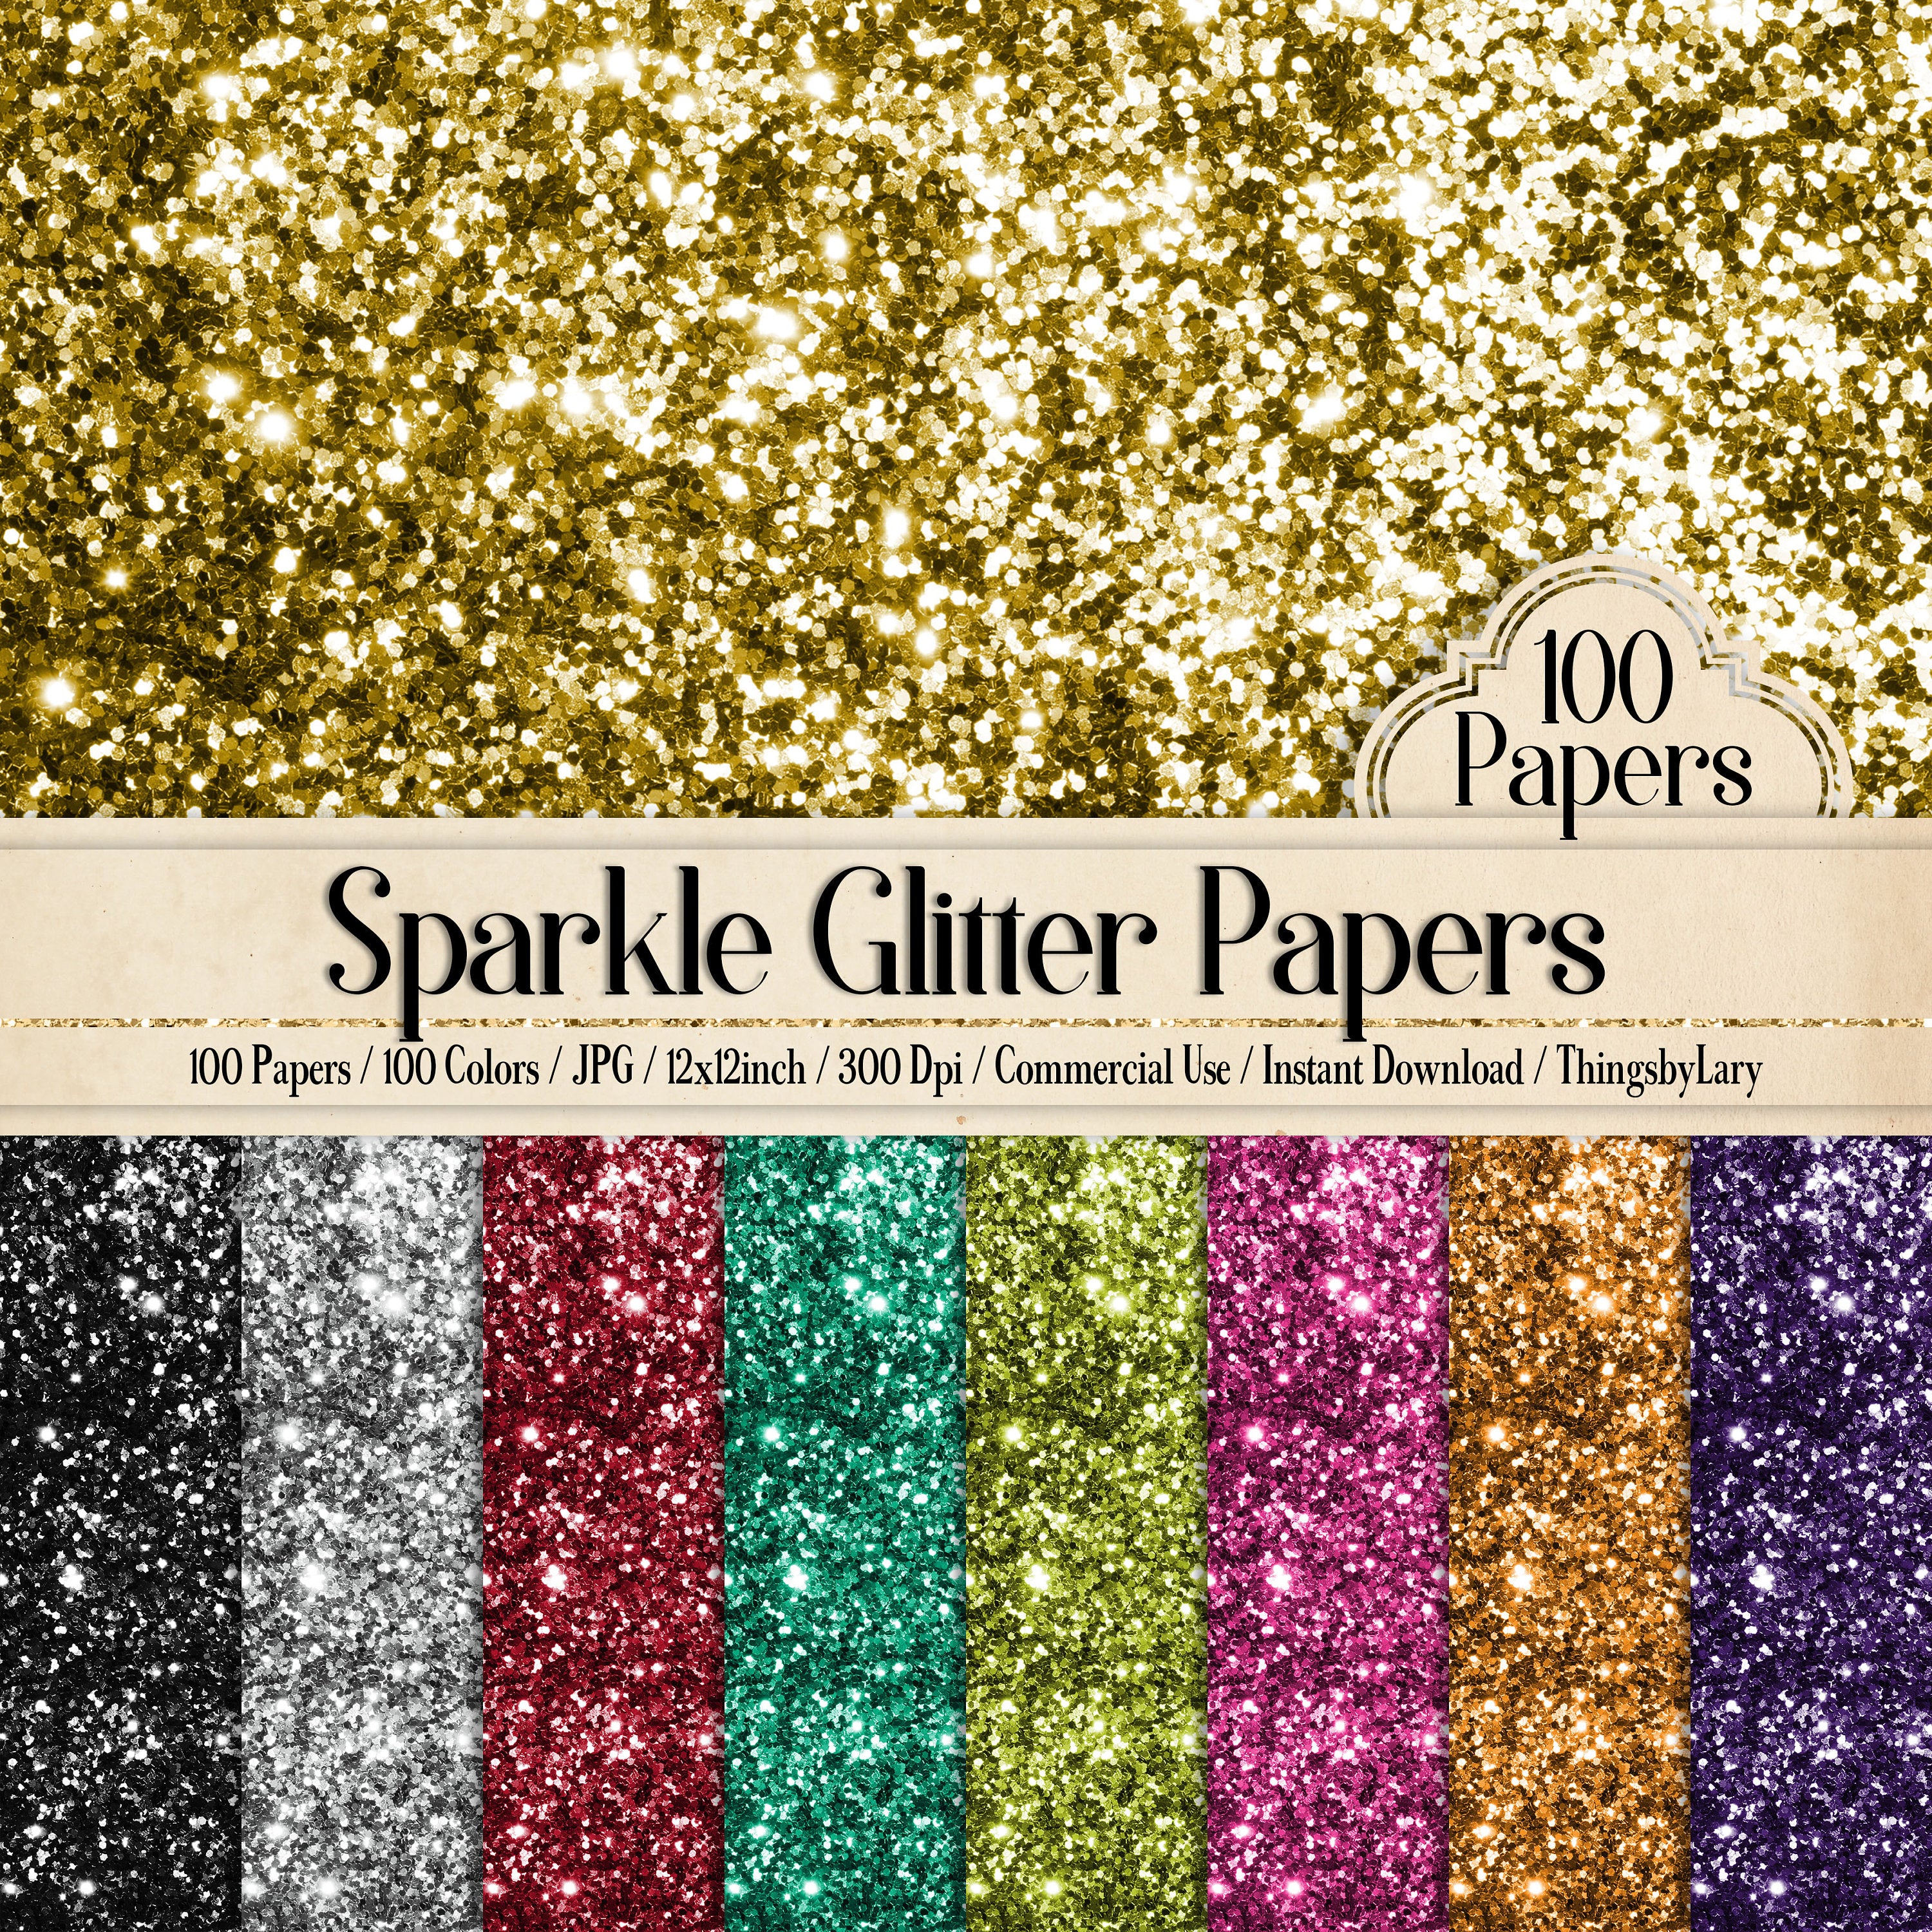 100 Sparkle Glitter Papers 12inch Instant Download Commercial Use 300 Dpi Planner Paper Scrapbook Paper, Luxury Glitter Texture Paper